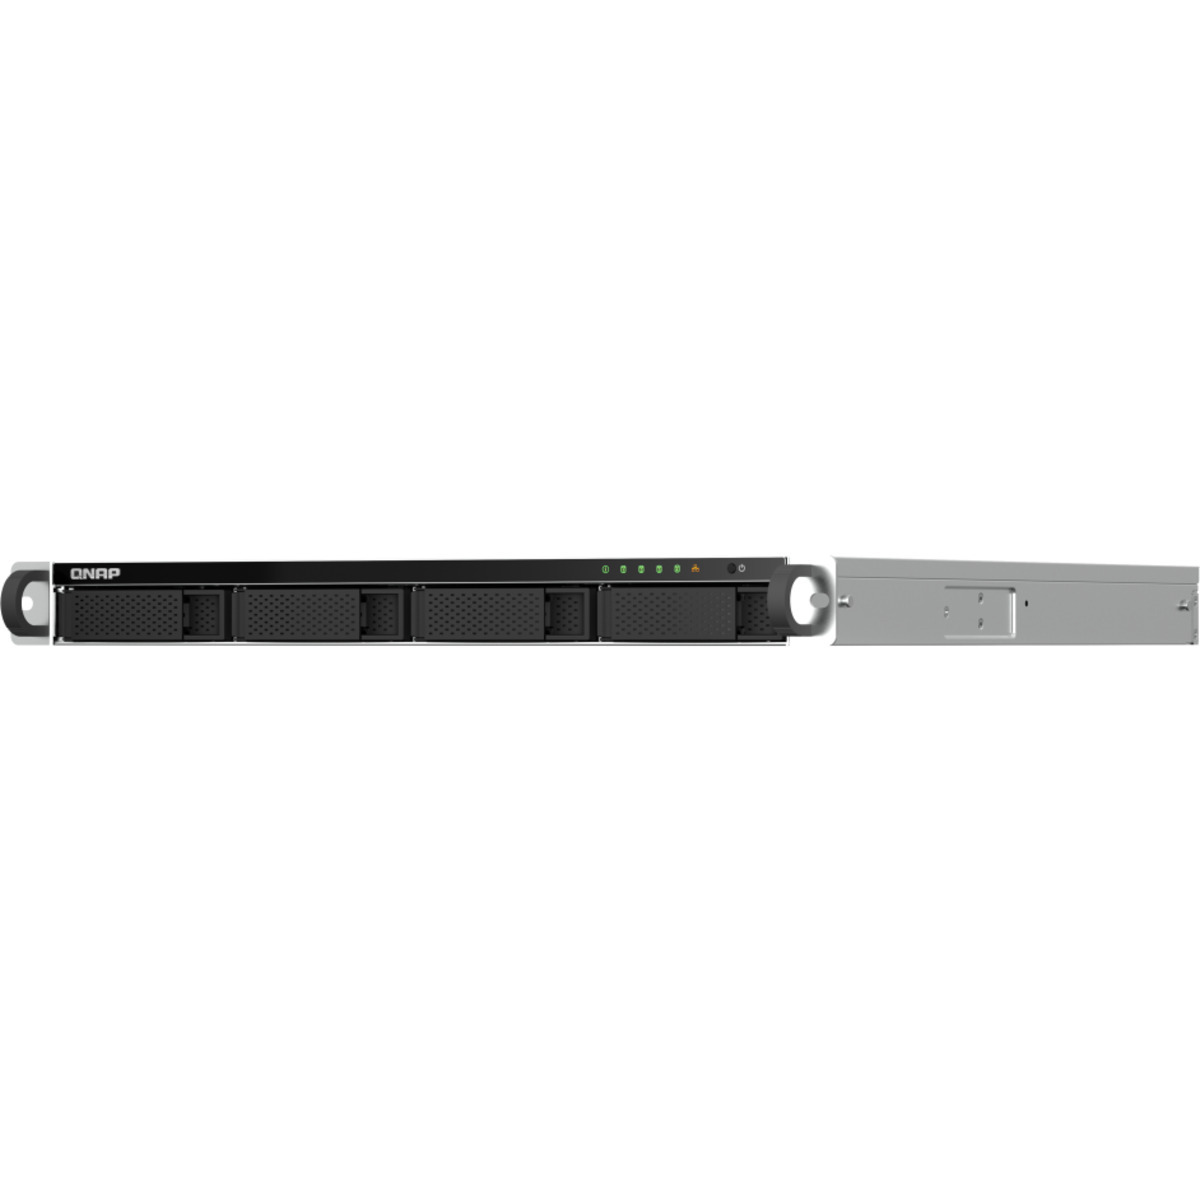 QNAP TS-464U-RP 32tb 4-Bay RackMount Multimedia / Power User / Business NAS - Network Attached Storage Device 2x16tb Seagate EXOS X18 ST16000NM000J 3.5 7200rpm SATA 6Gb/s HDD ENTERPRISE Class Drives Installed - Burn-In Tested TS-464U-RP